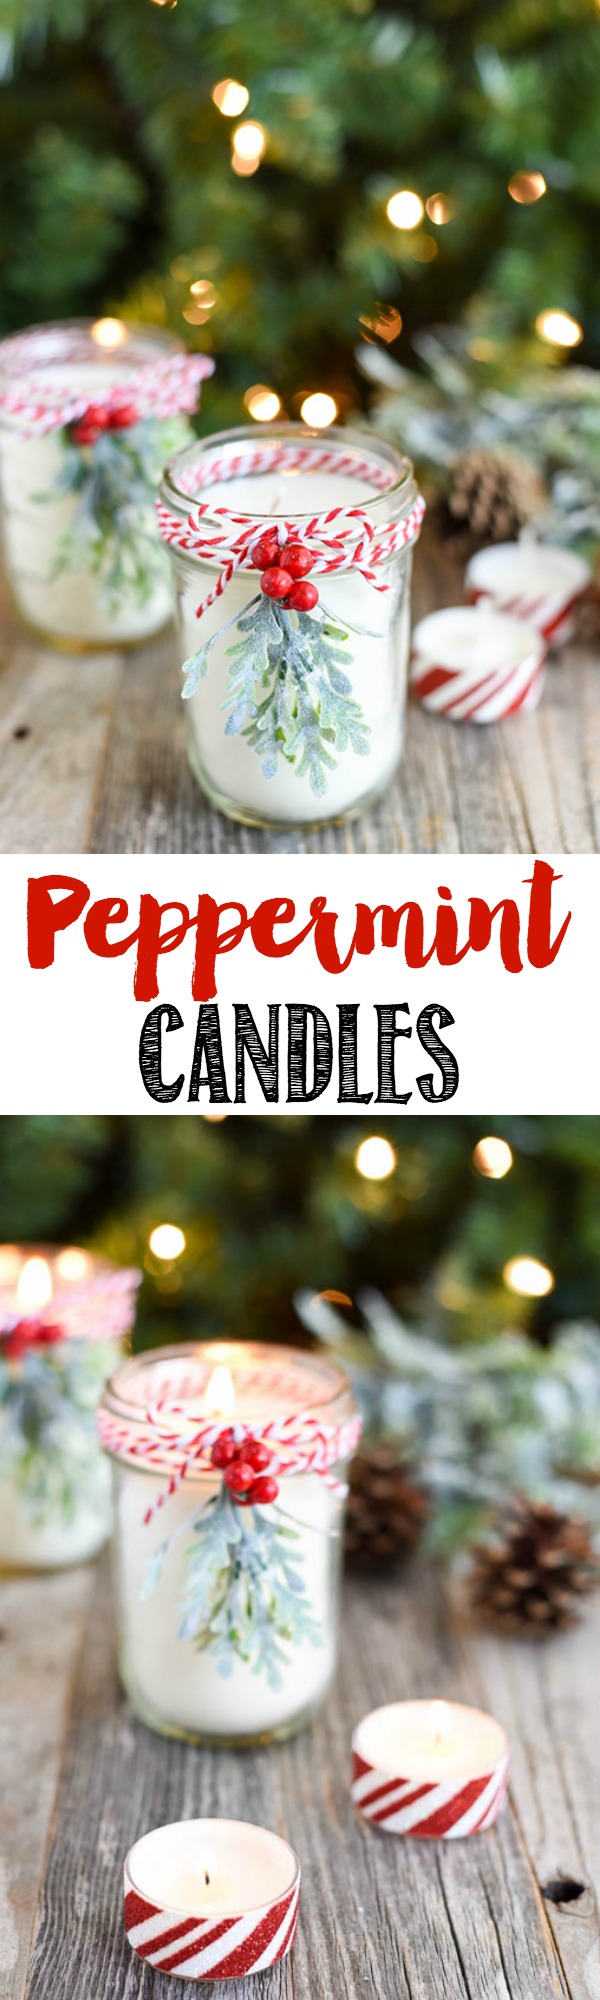 DIY-Peppermint-Candles